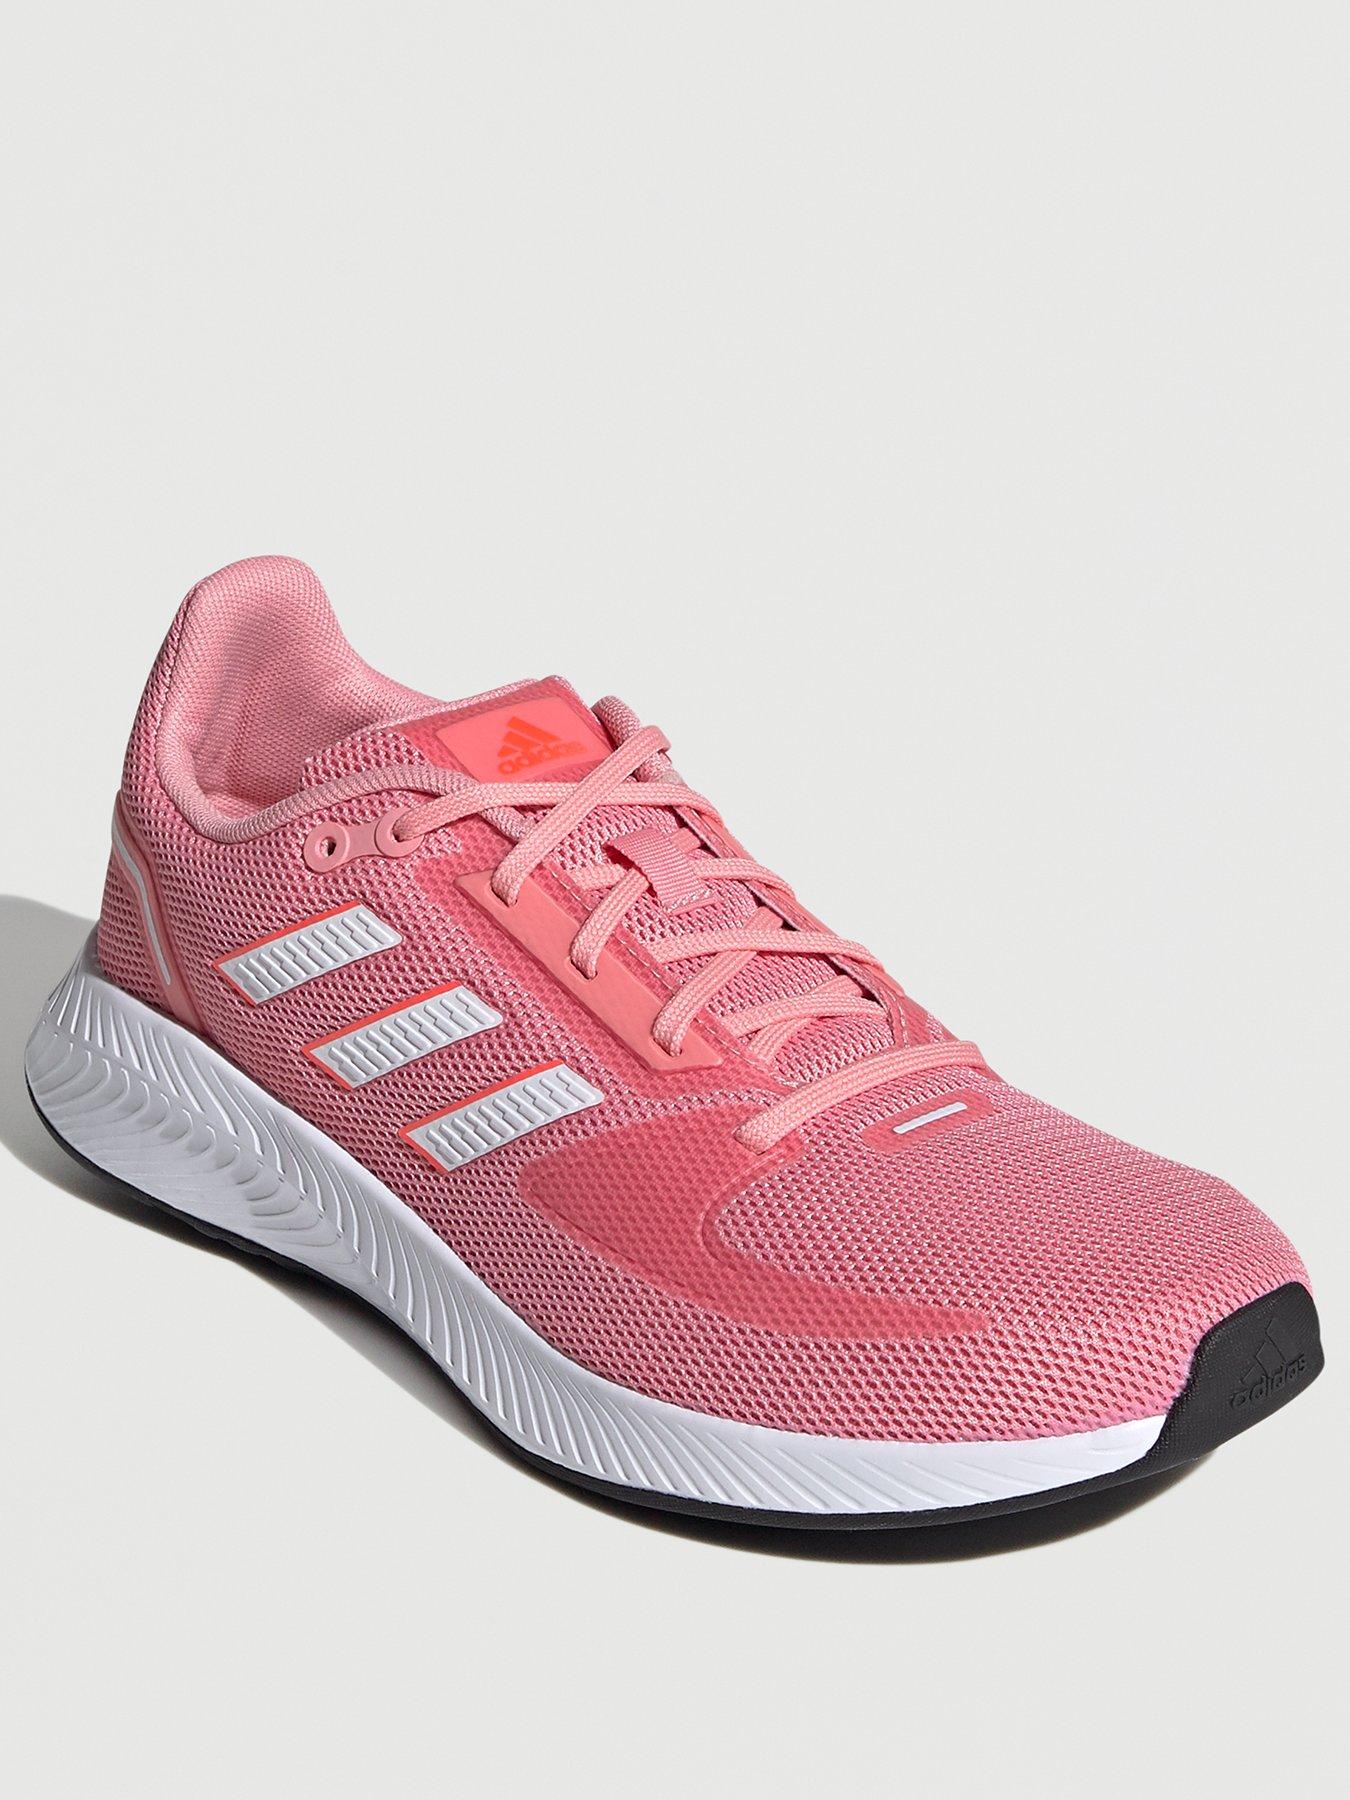 Trainers Runfalcon 2.0 - Pink/White